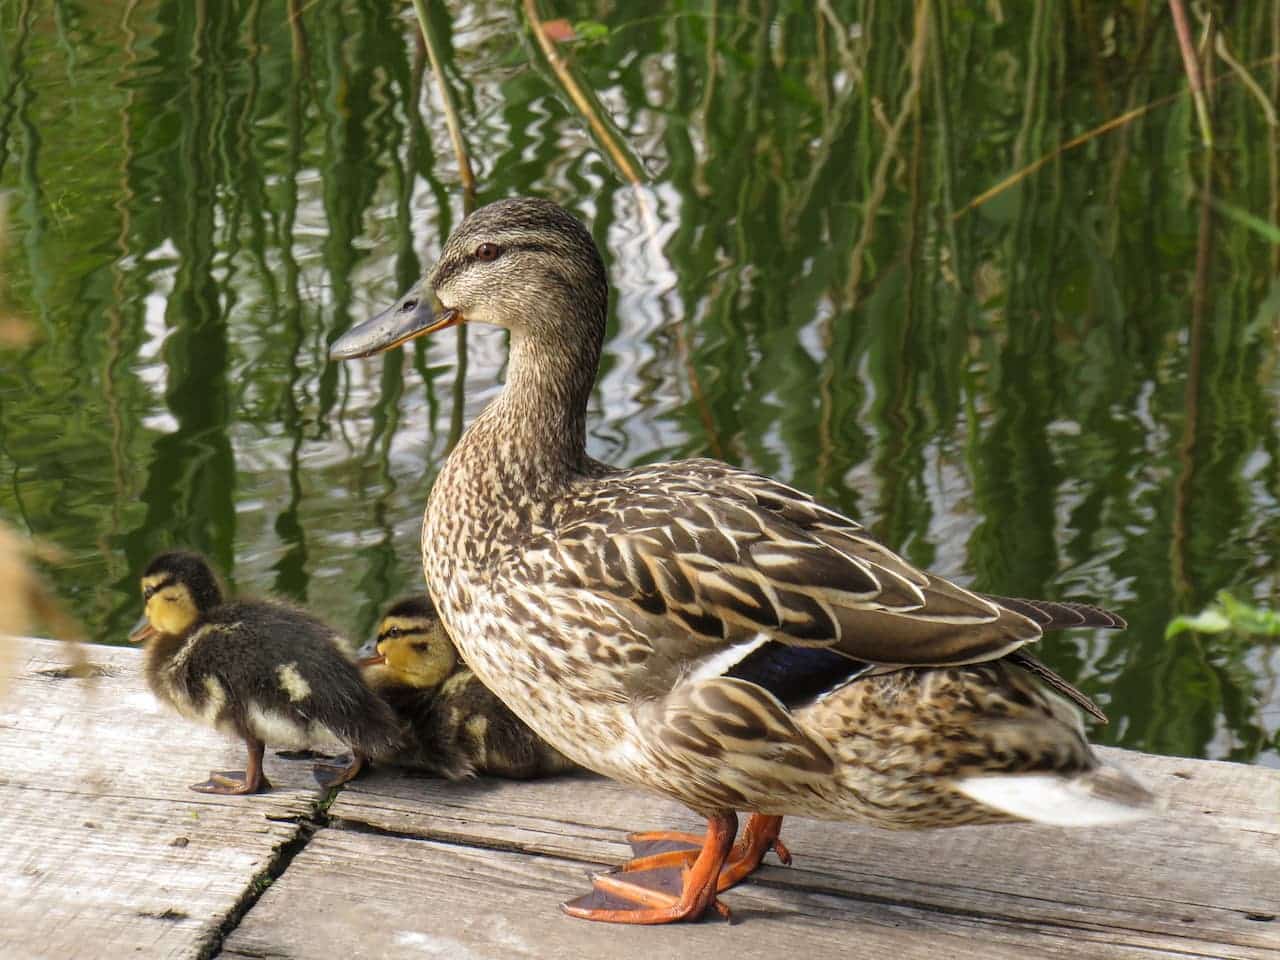 Salvadori's Ducks with the little duckling